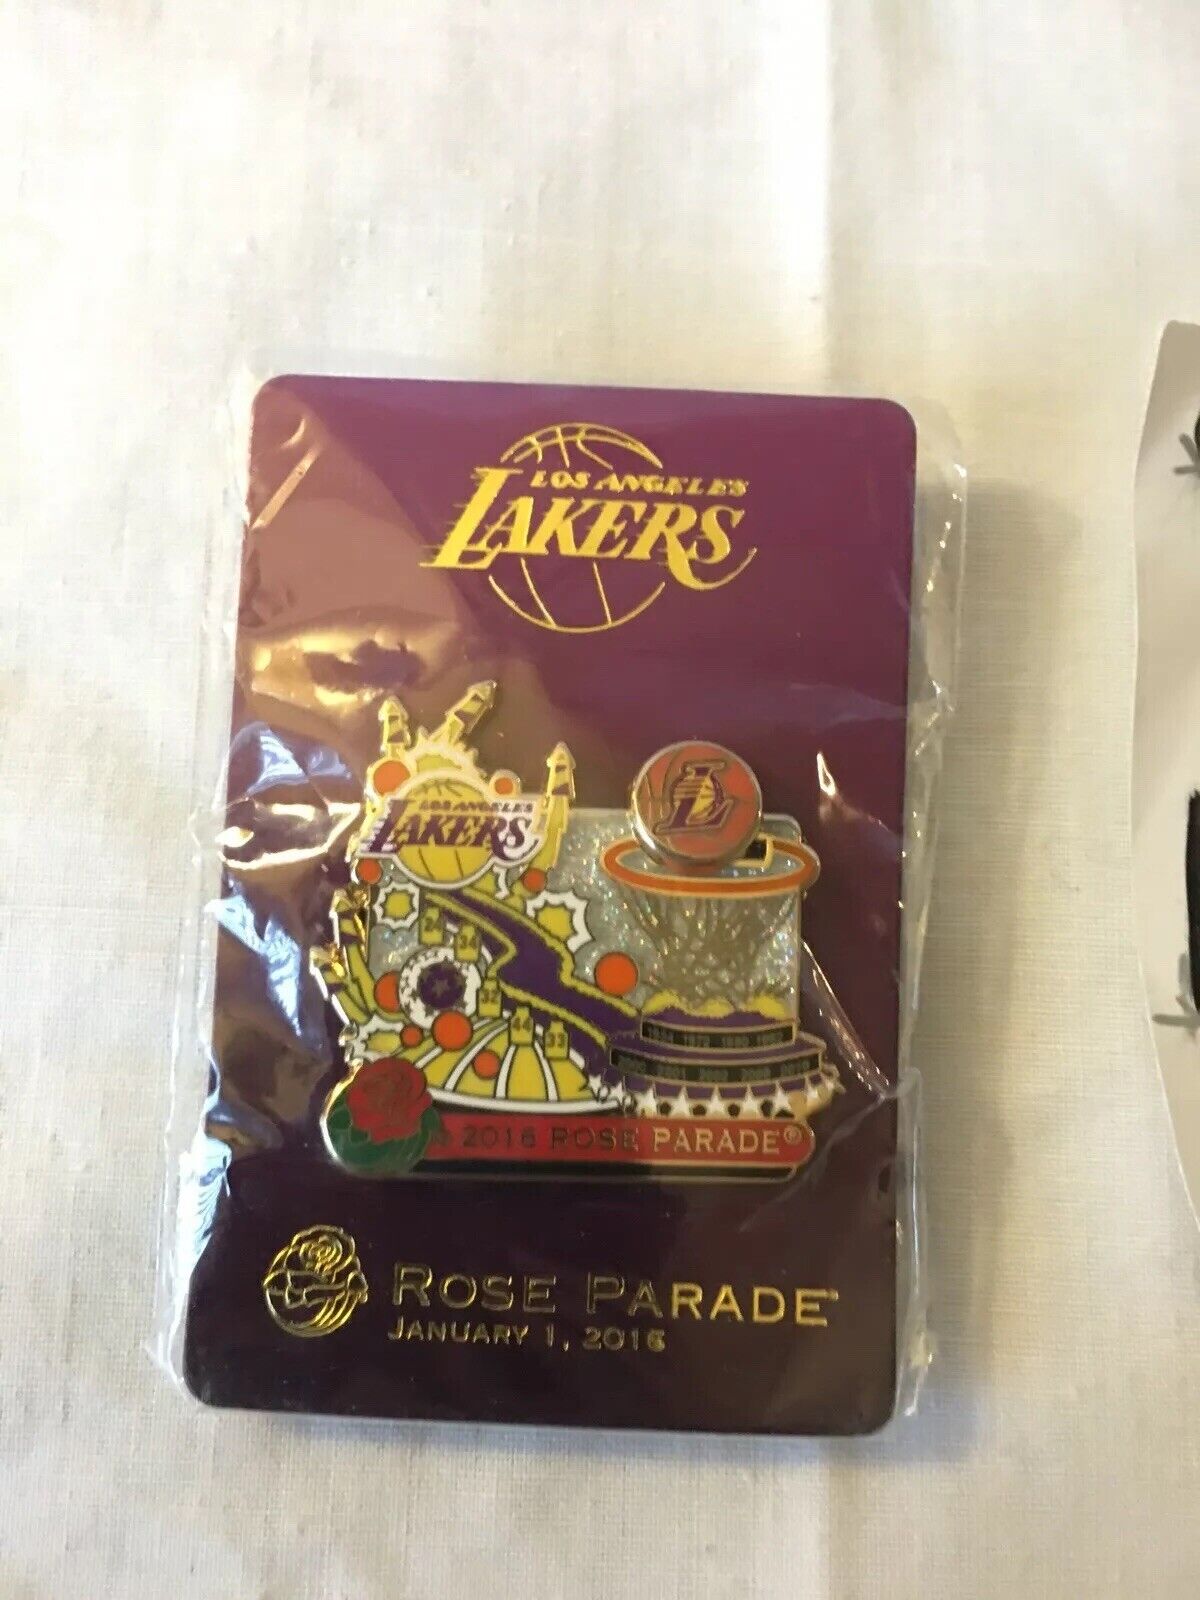 *RARE*Limited Edition 2016 ROSE PARADE Los Angeles Lakers Commemorative Pin, New